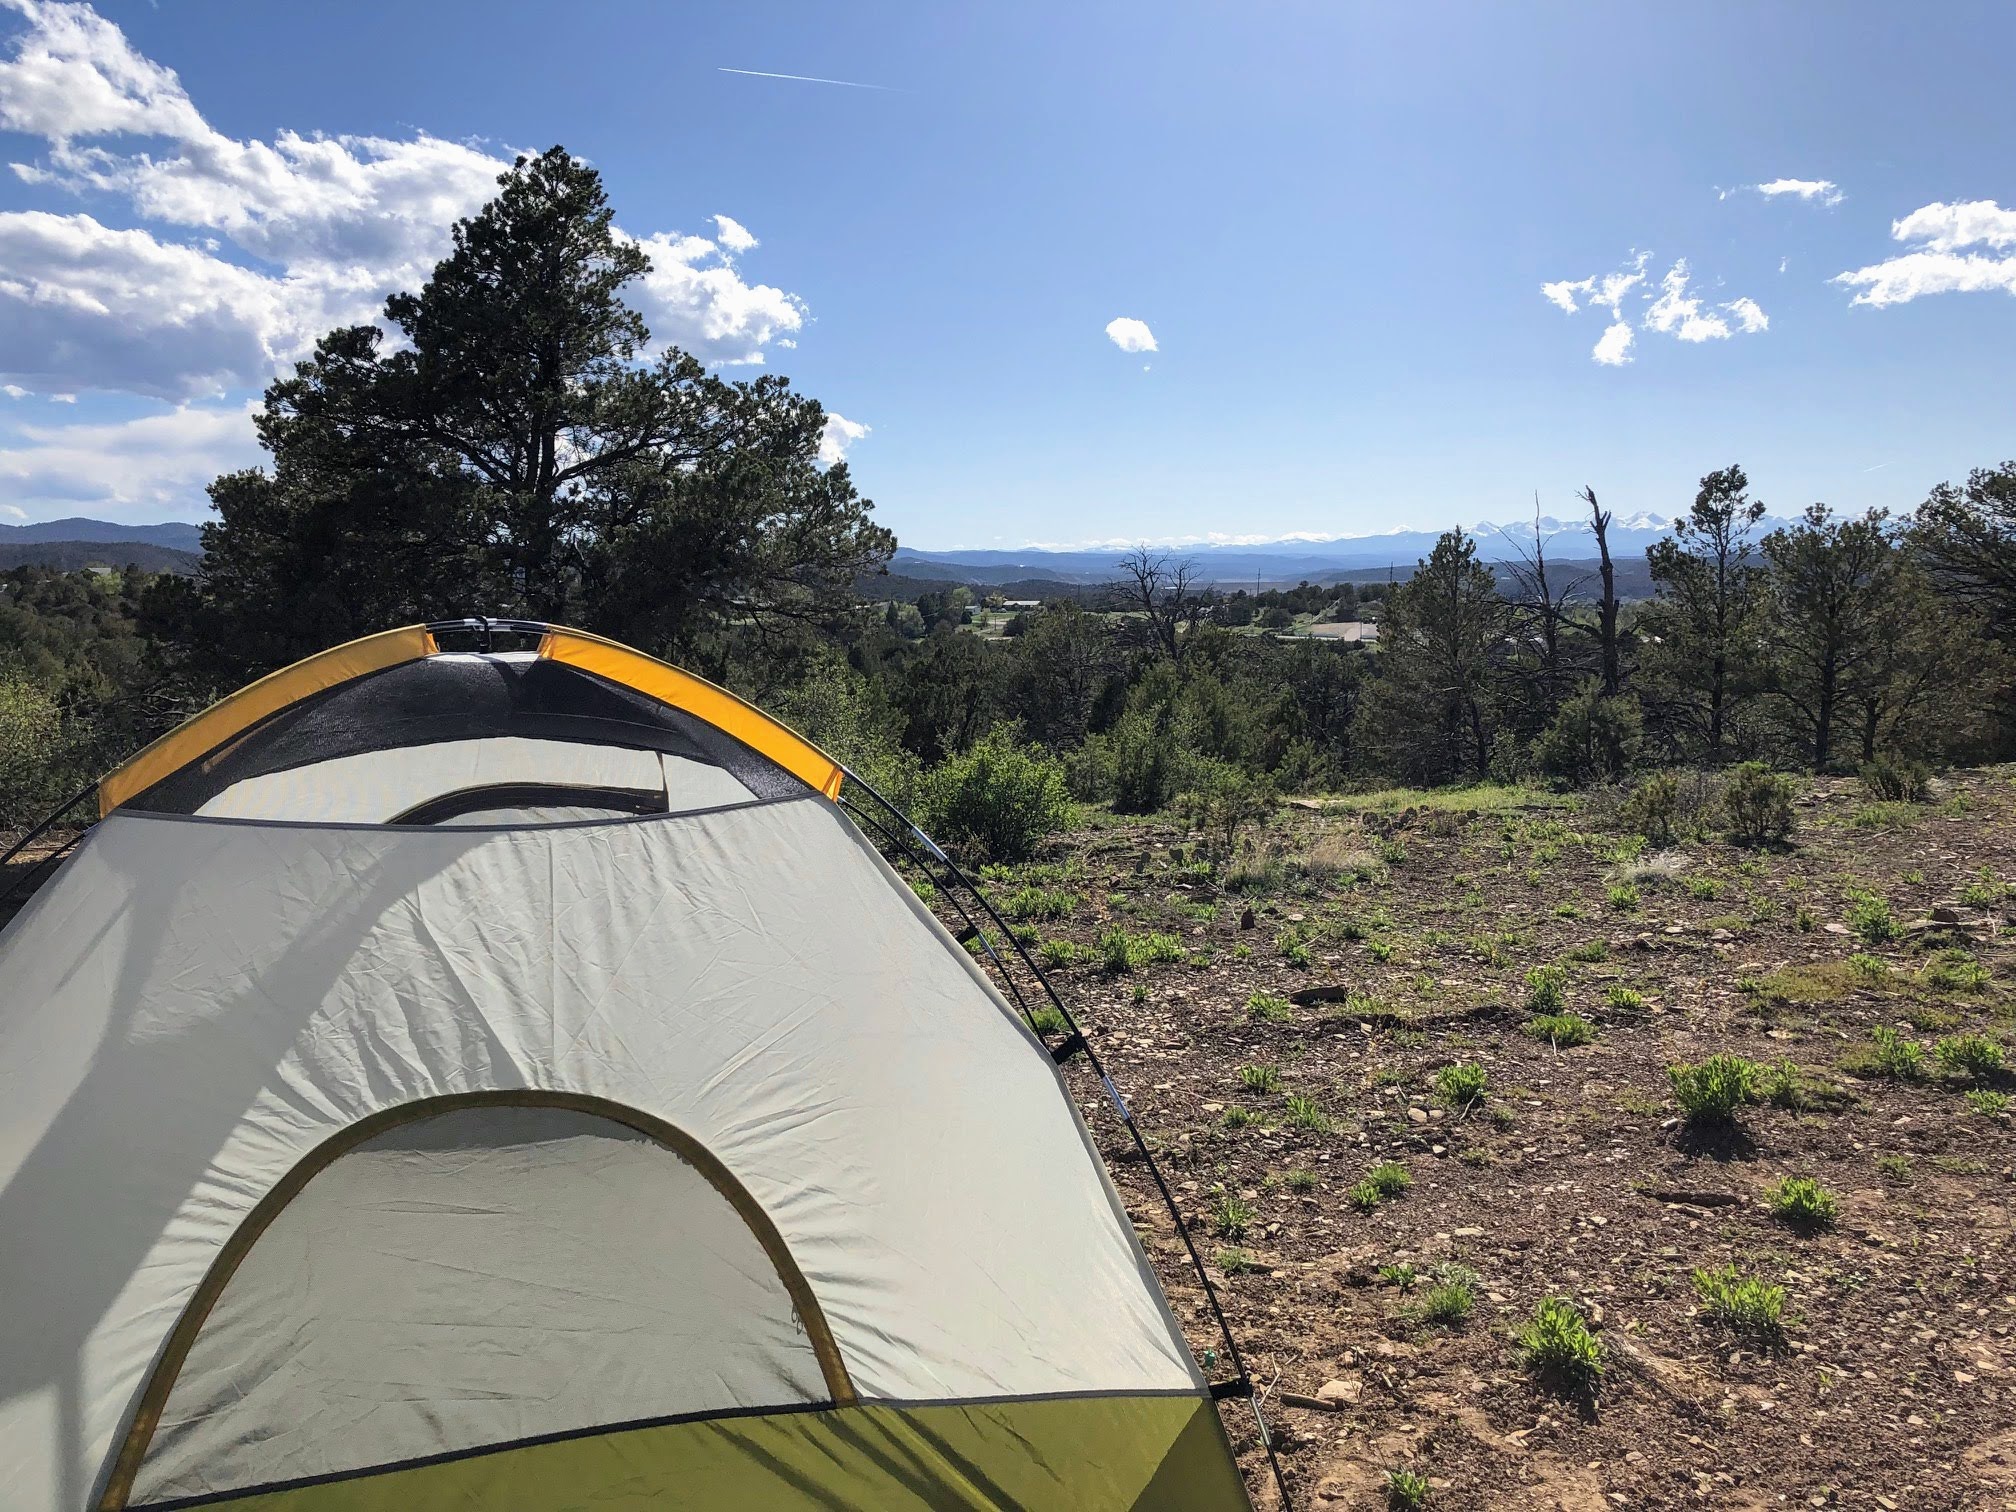 A tent pitched on a dirt lot with trees and large mountains in the far background.